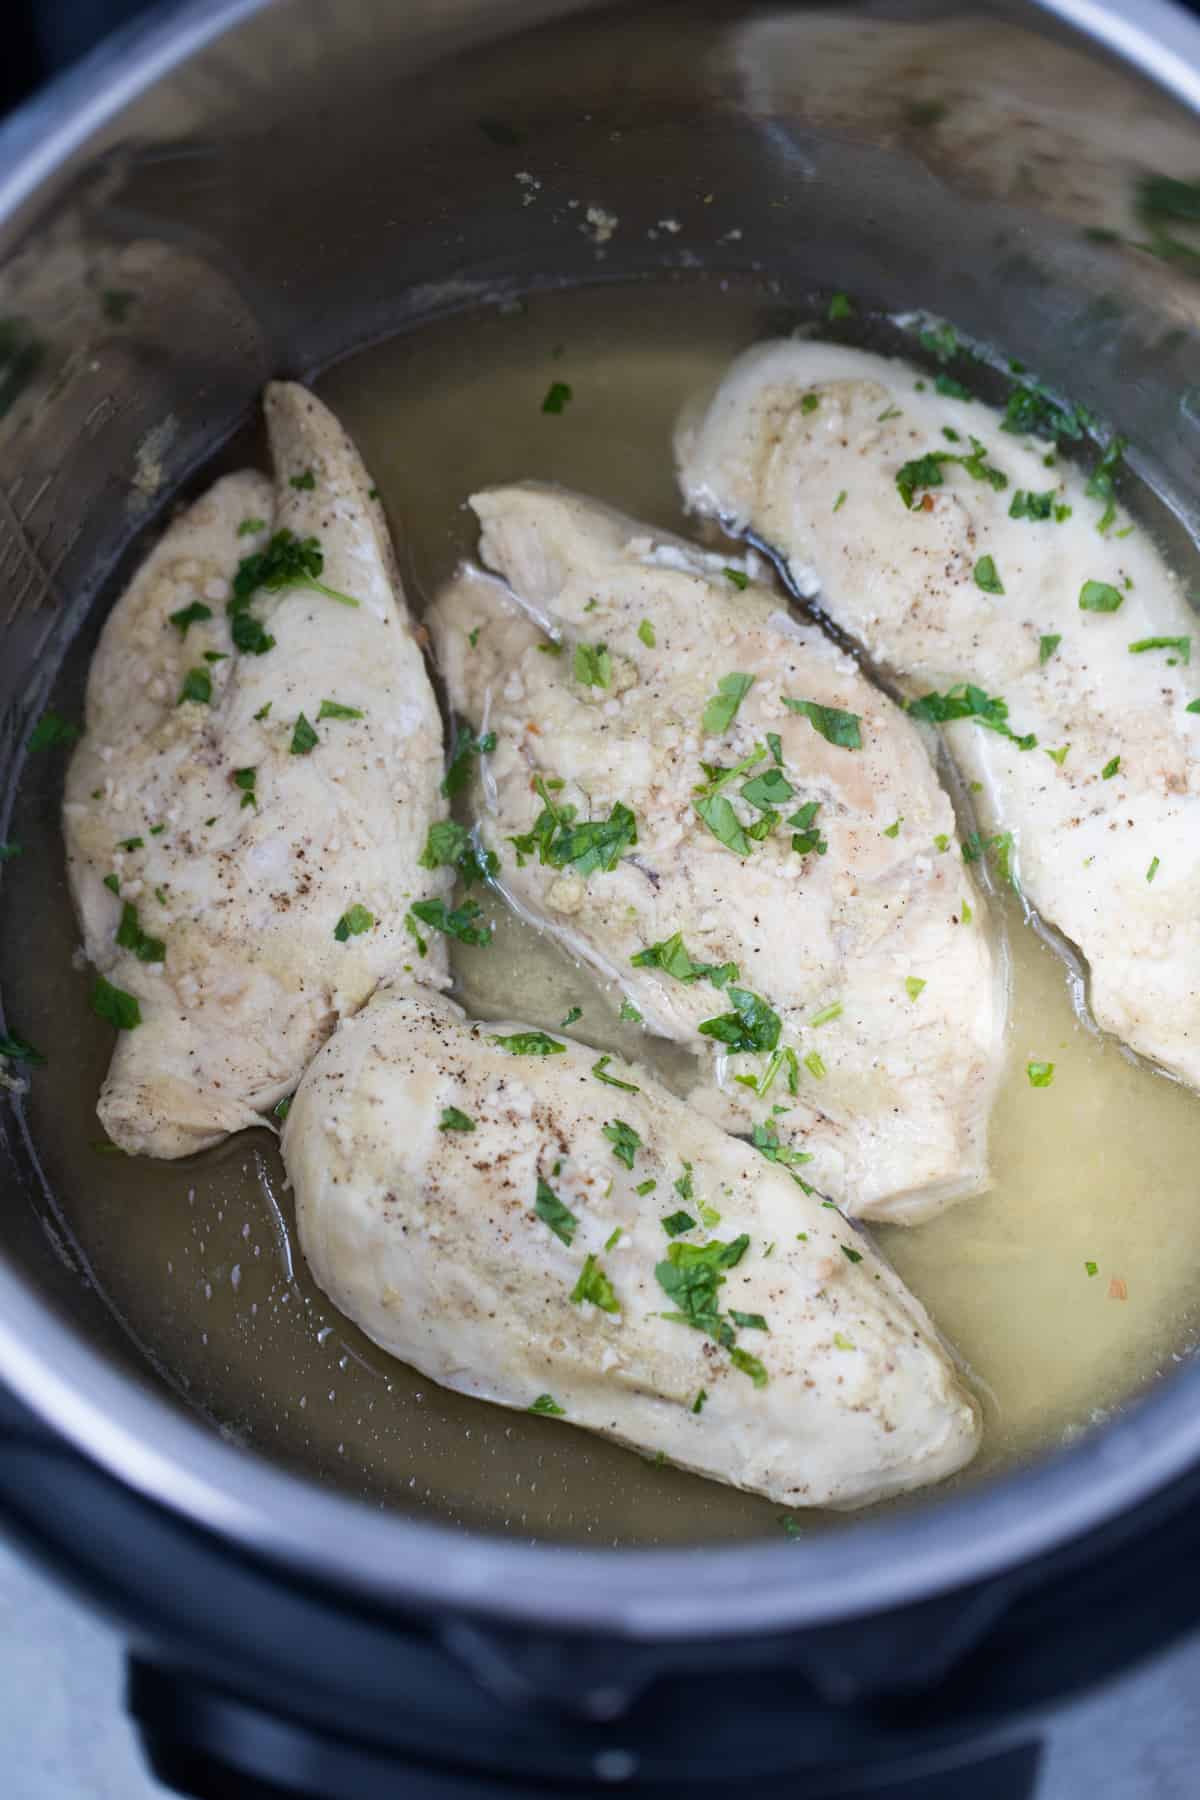 Four Chicken Breasts inside instant Pot sprinkled with parsley.